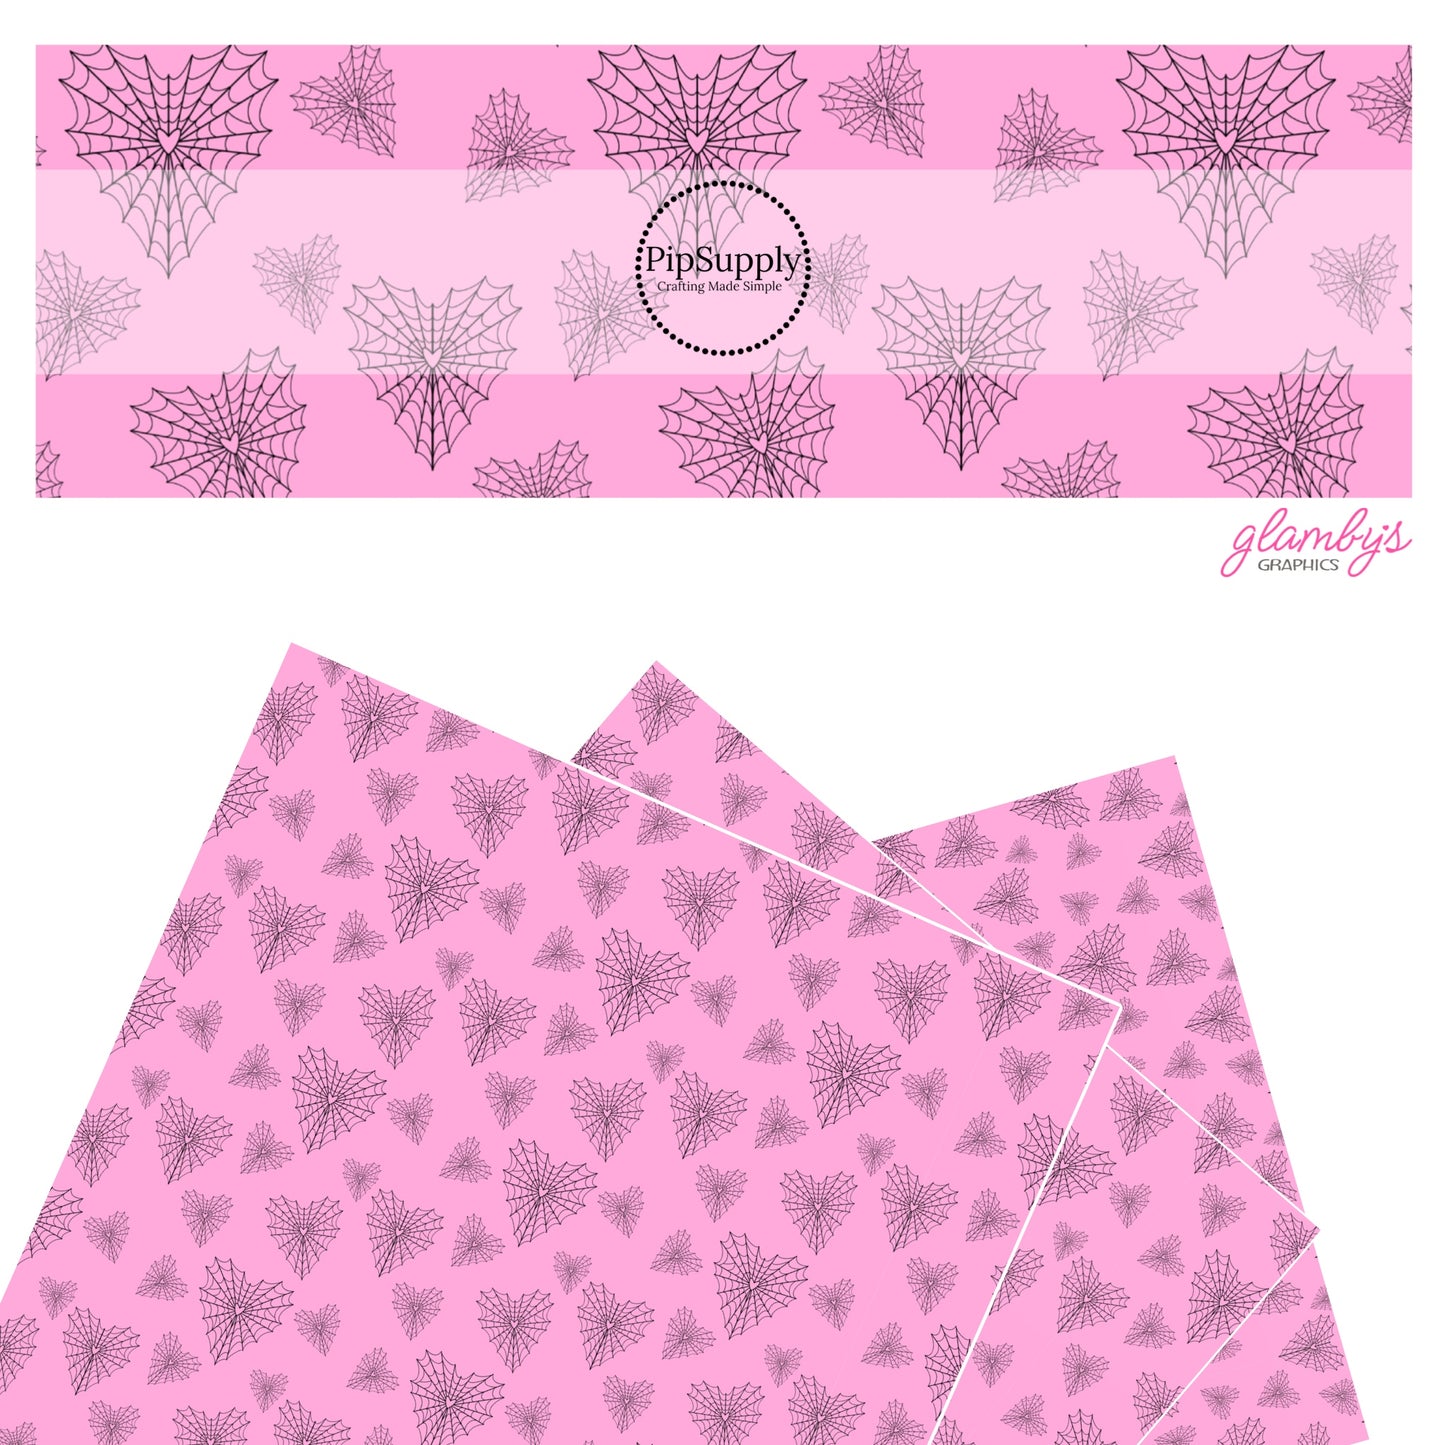 Black heart shaped webs on pink faux leather sheets